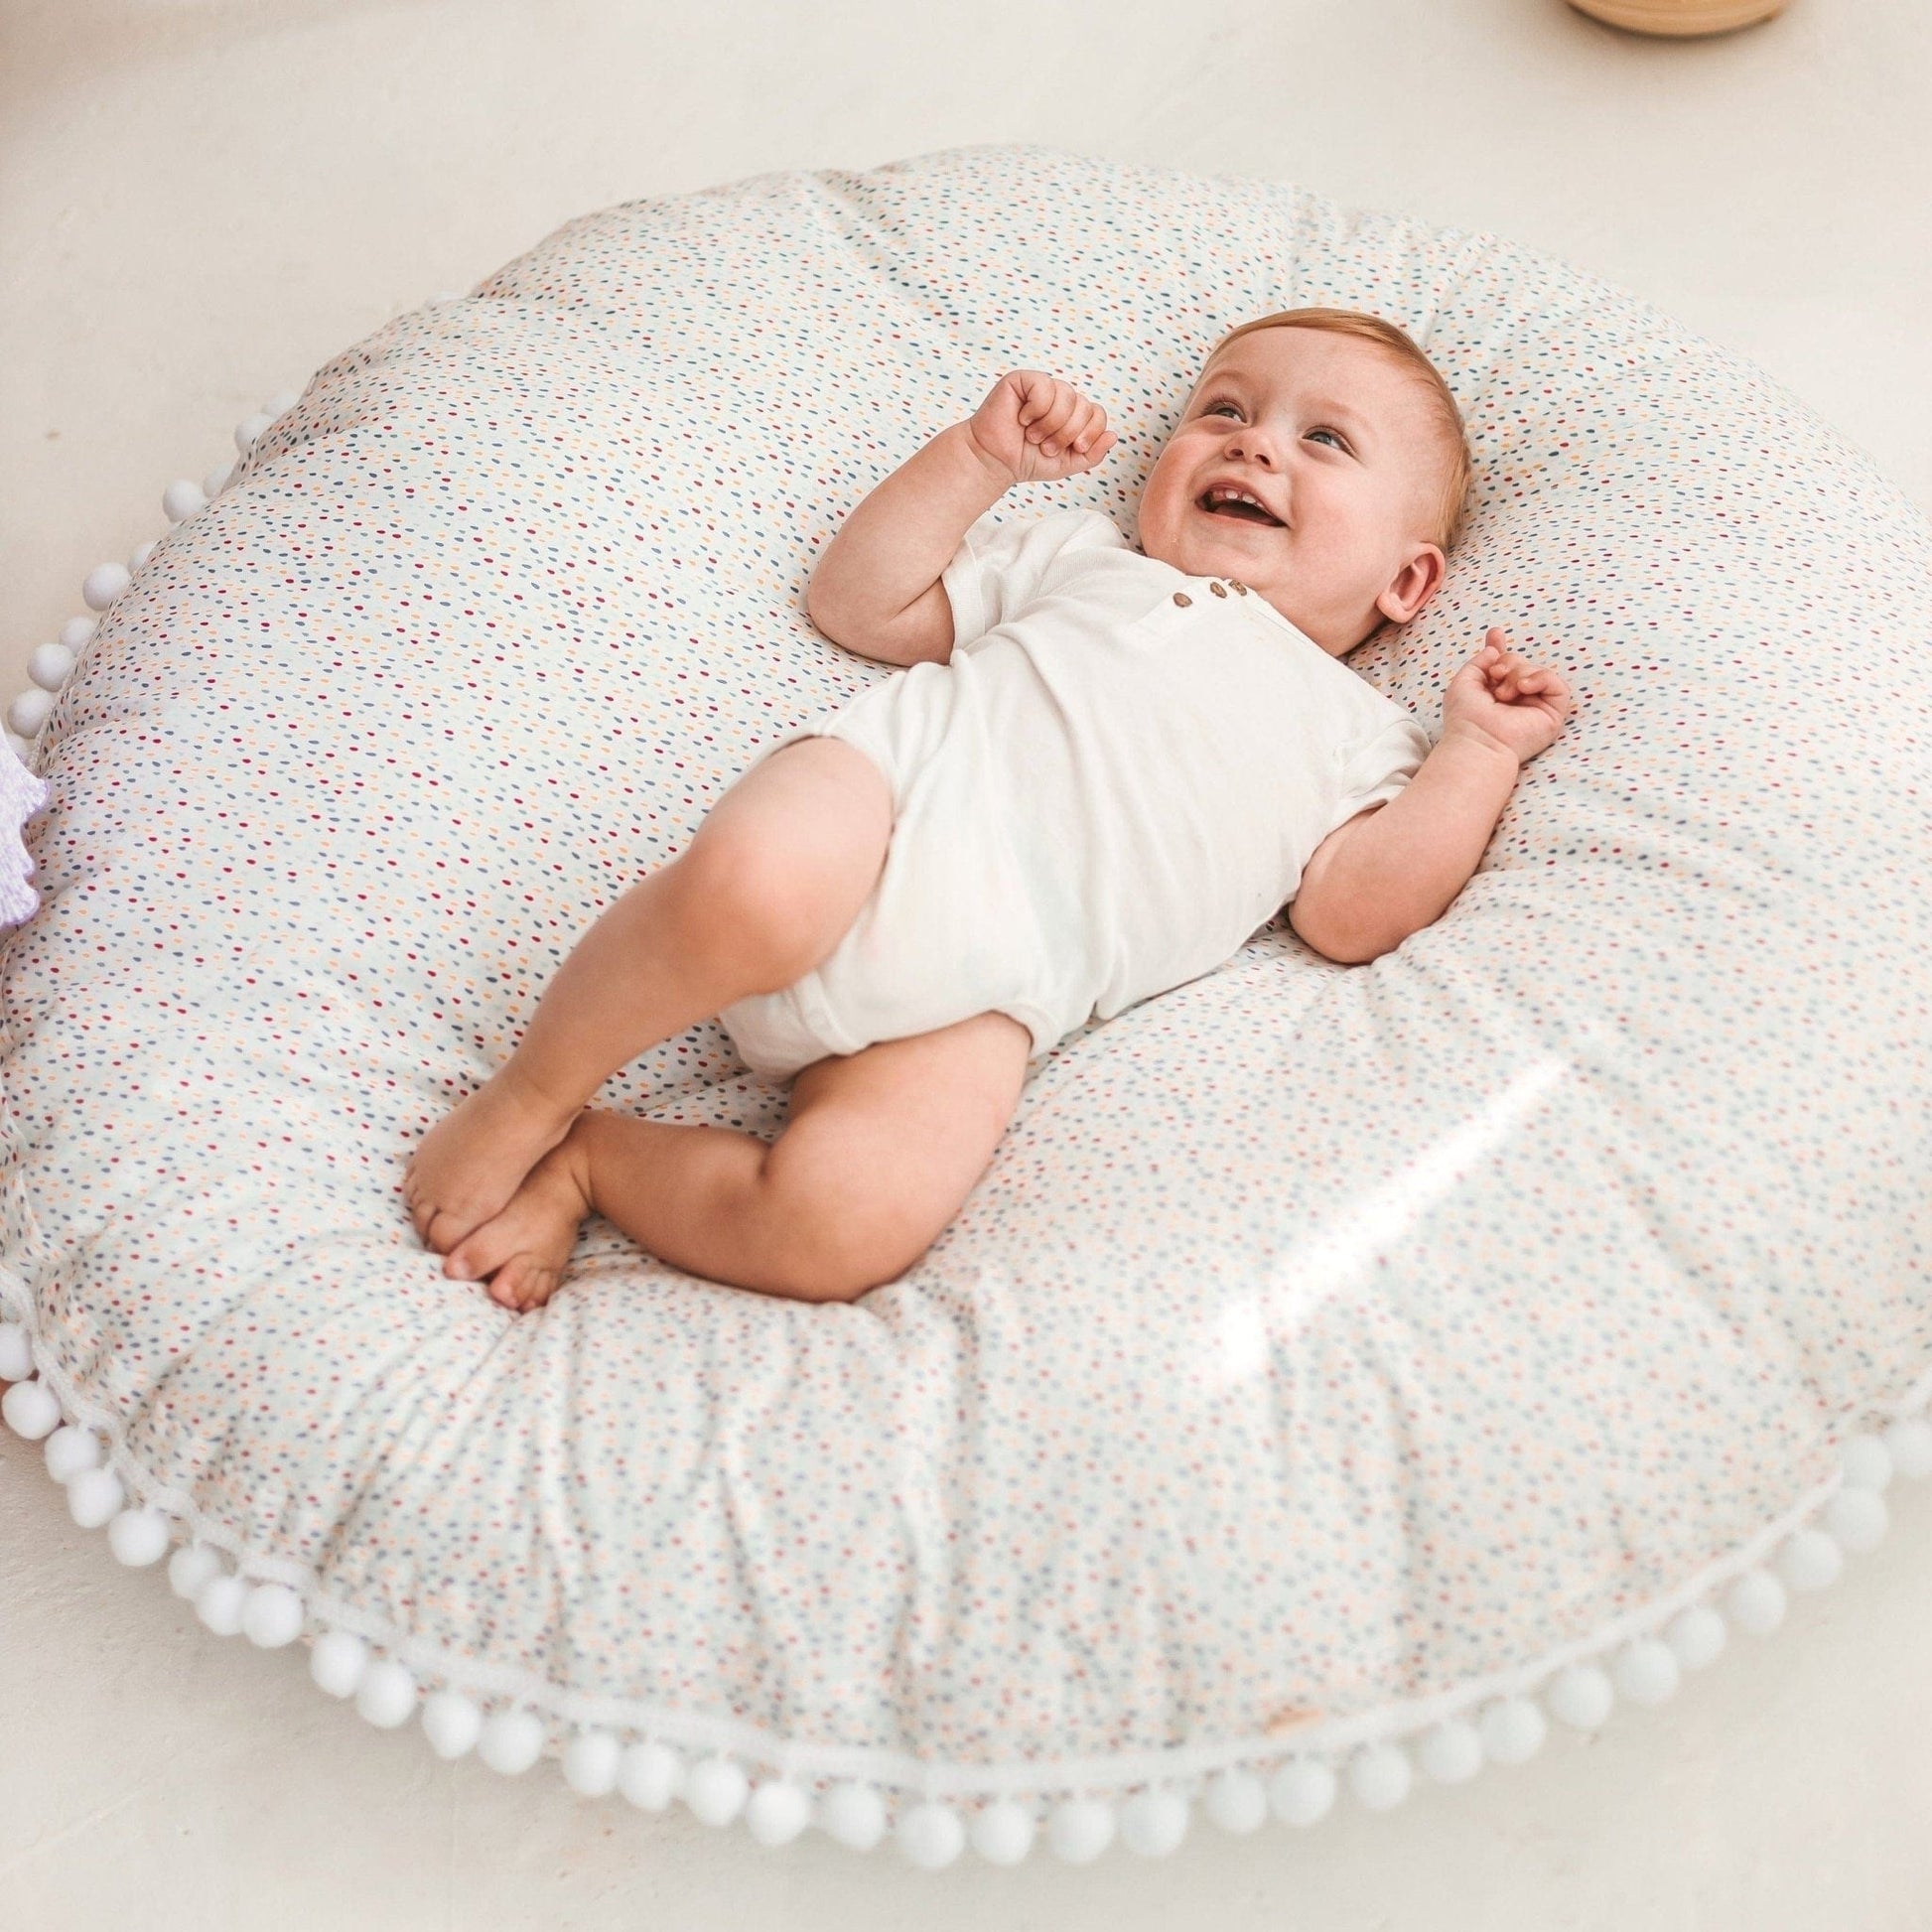 smiling baby lying on MINICAMP Big Floor Cushion With Pompoms in Colour Drops on White